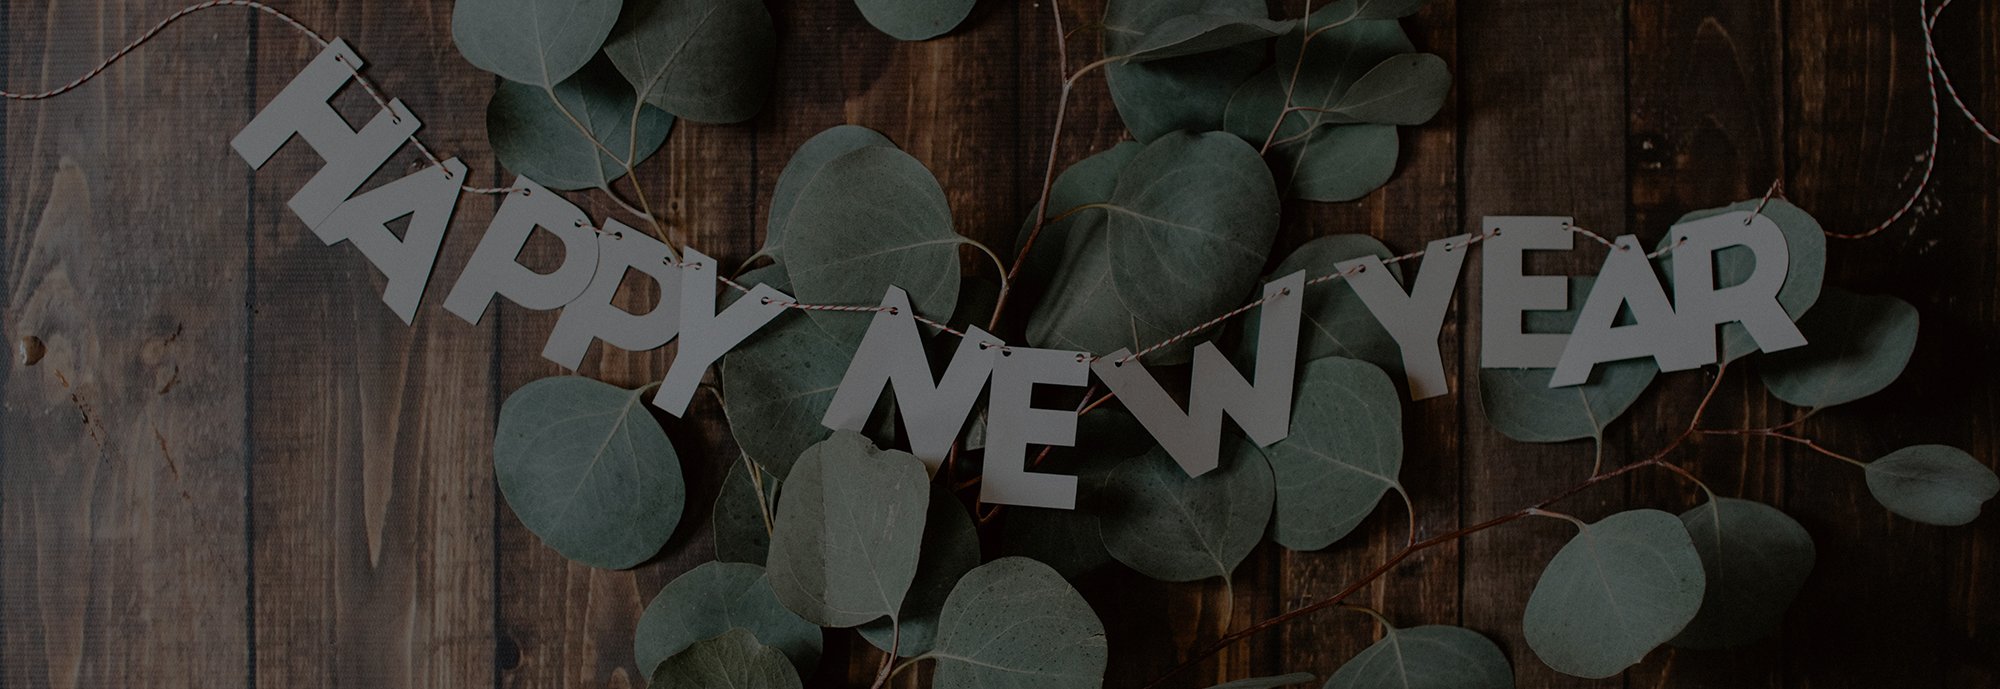 New Years Resolutions for Every Recruiter in 2020